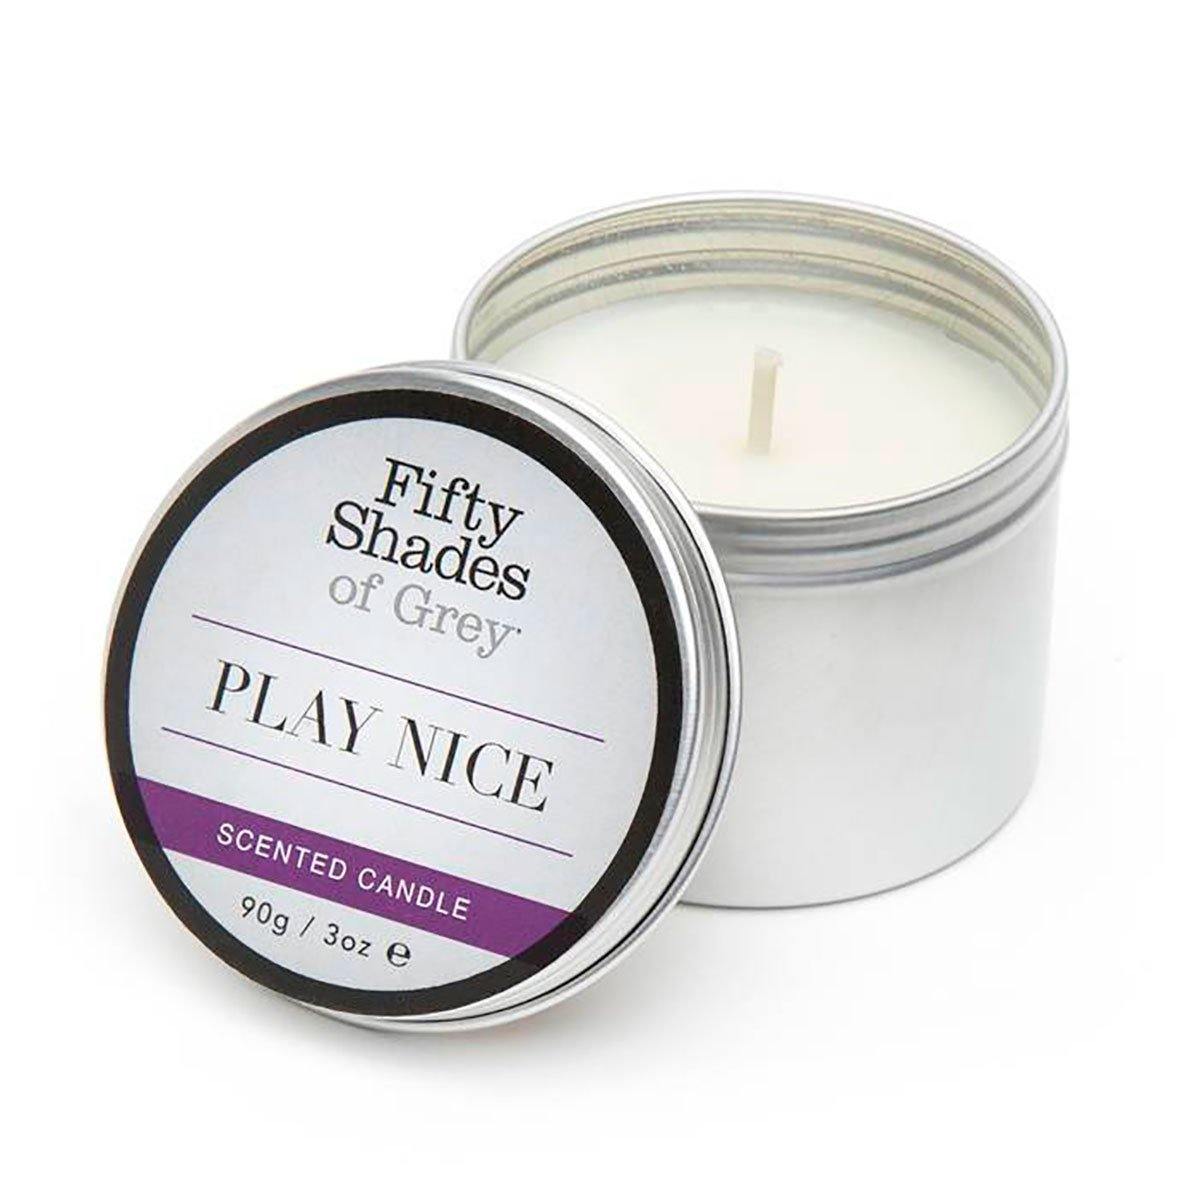 Fifty Shades - Play Nice Vanilla Scented Candle 3oz - Buy At Luxury Toy X - Free 3-Day Shipping